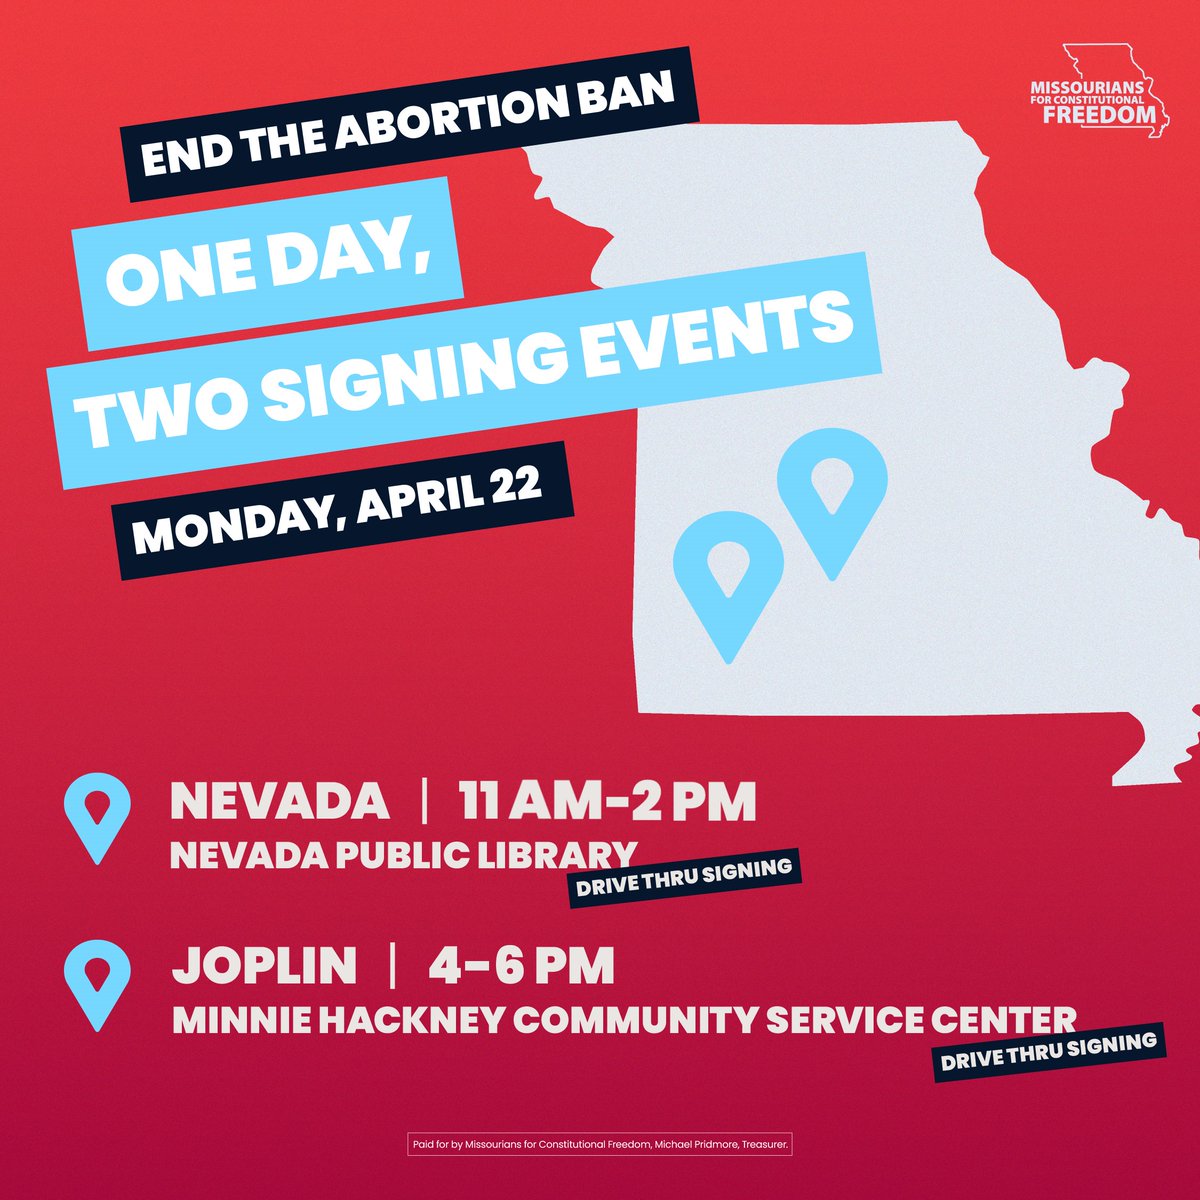 Only two weeks left to make your voice heard to end the Missouri abortion ban! These are just two of our signing opportunities coming up. Click the link to find out where else you can sign around the state! Let's #EndTheBanMO together! mobilize.us/mfcf/